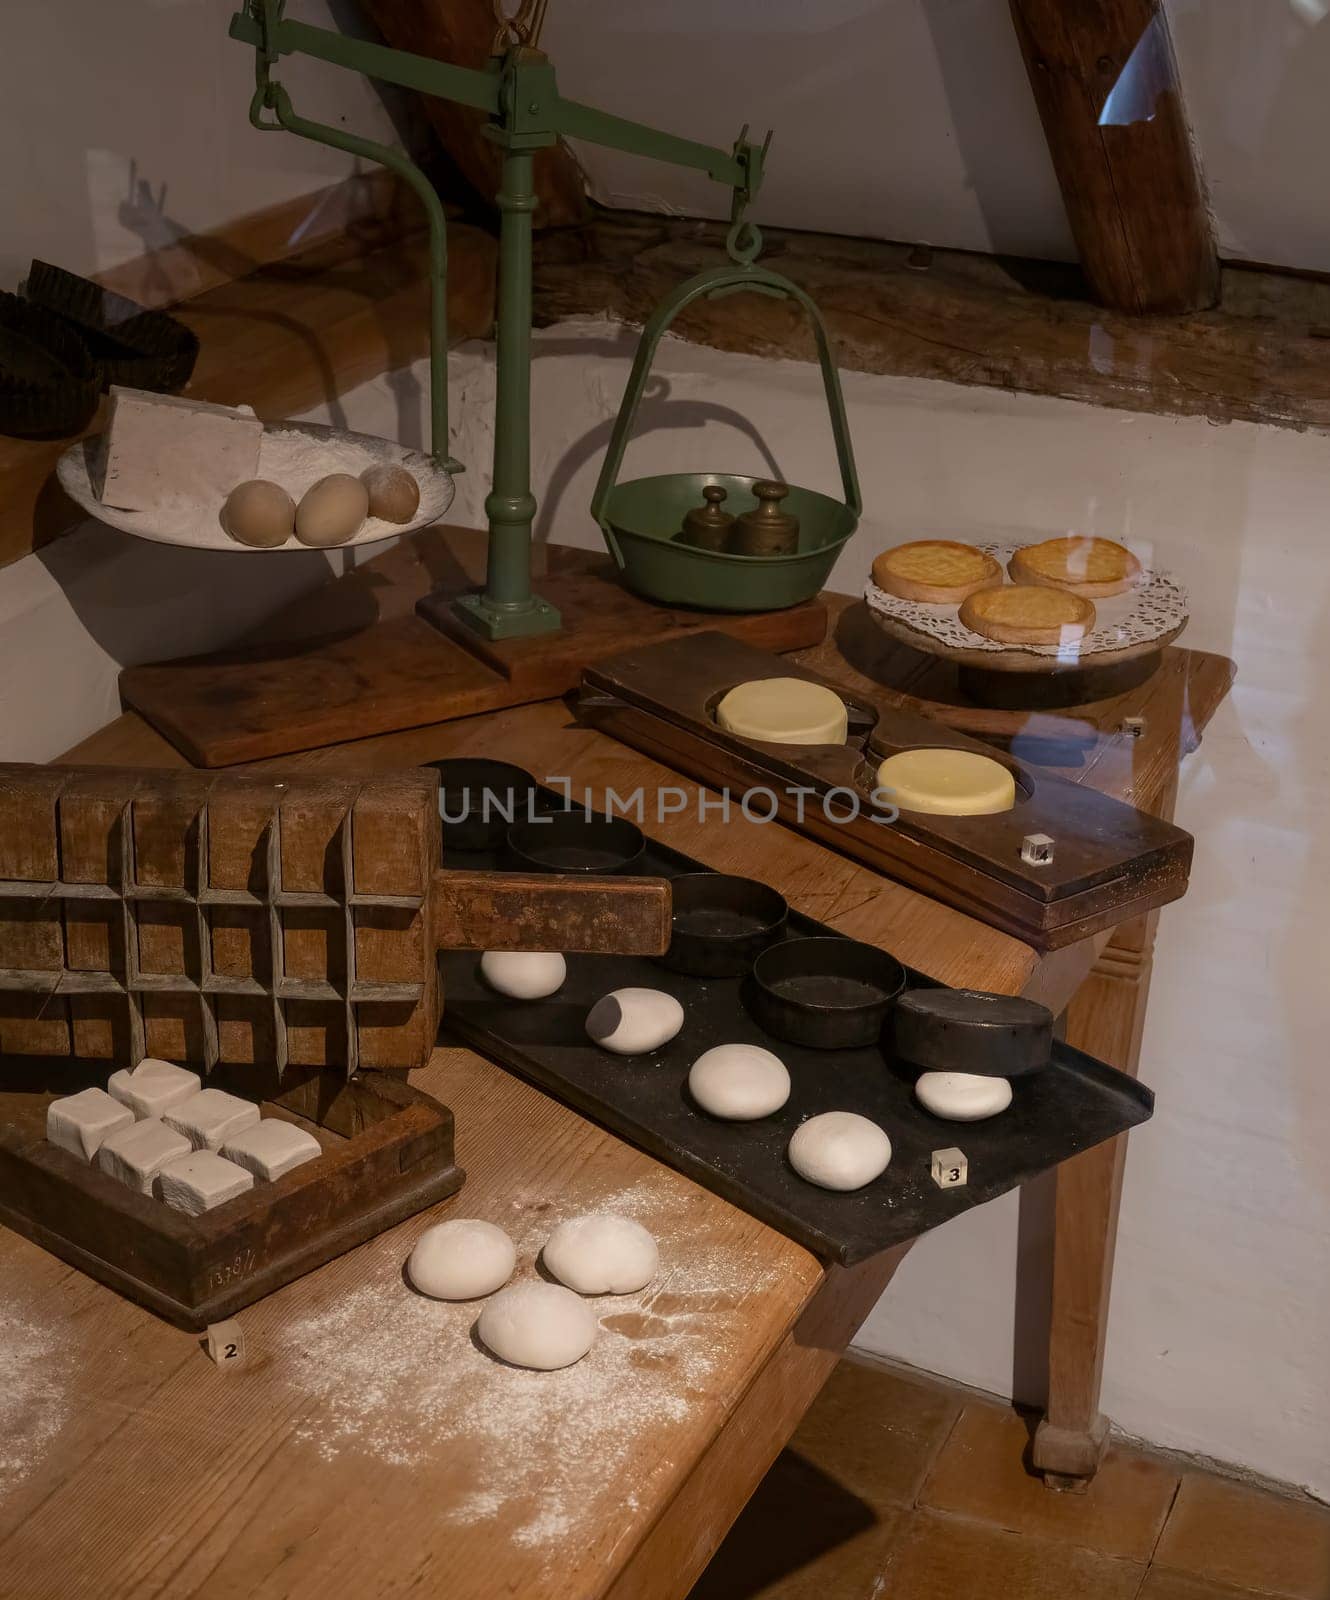 indoor bakery with equipment for making bread by compuinfoto